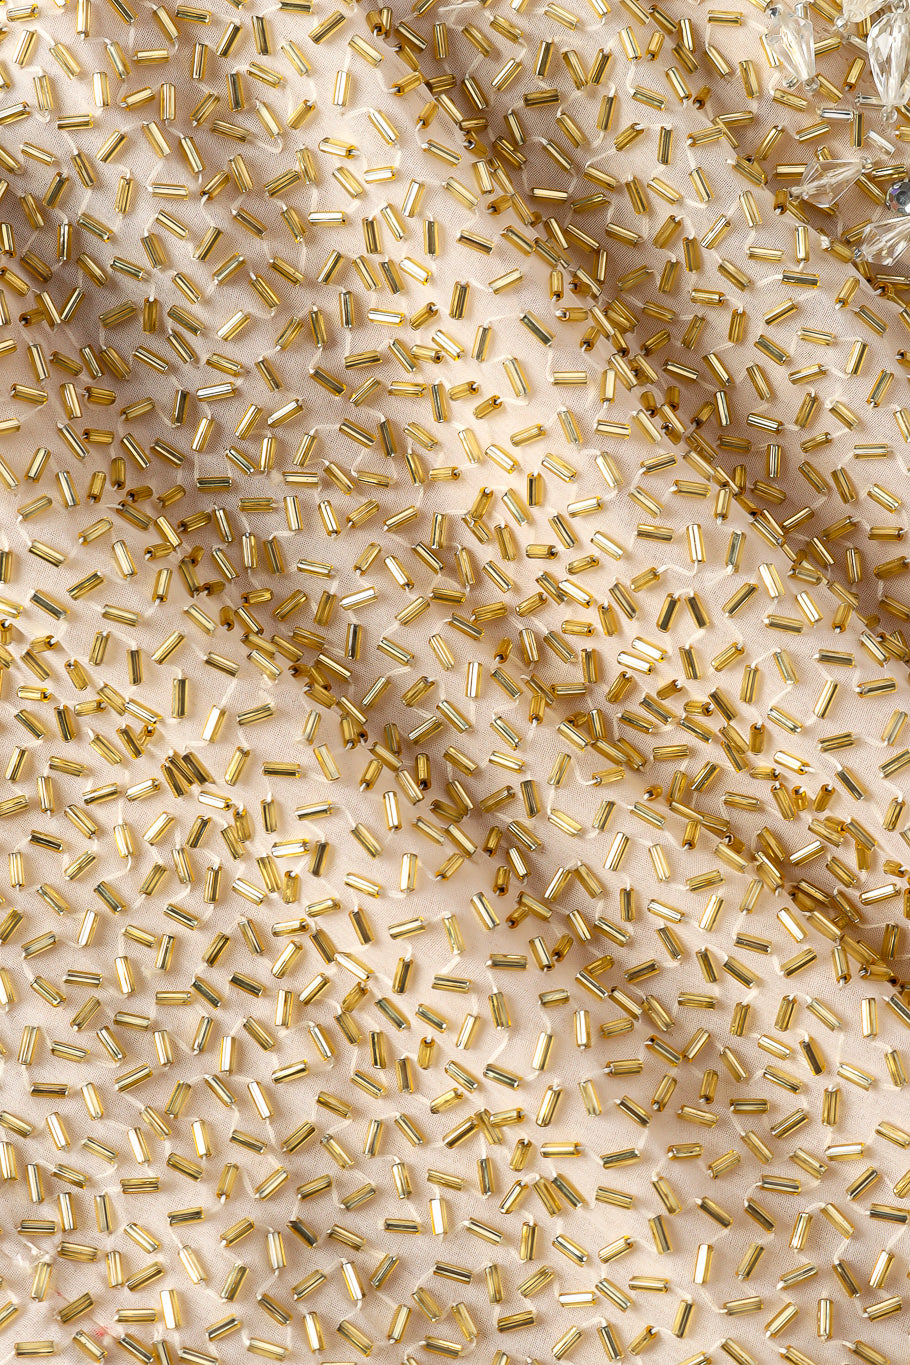 Beaded champagne silk shift dress by Victoria Royal Beaded Fabric Details Close-up. @recessla